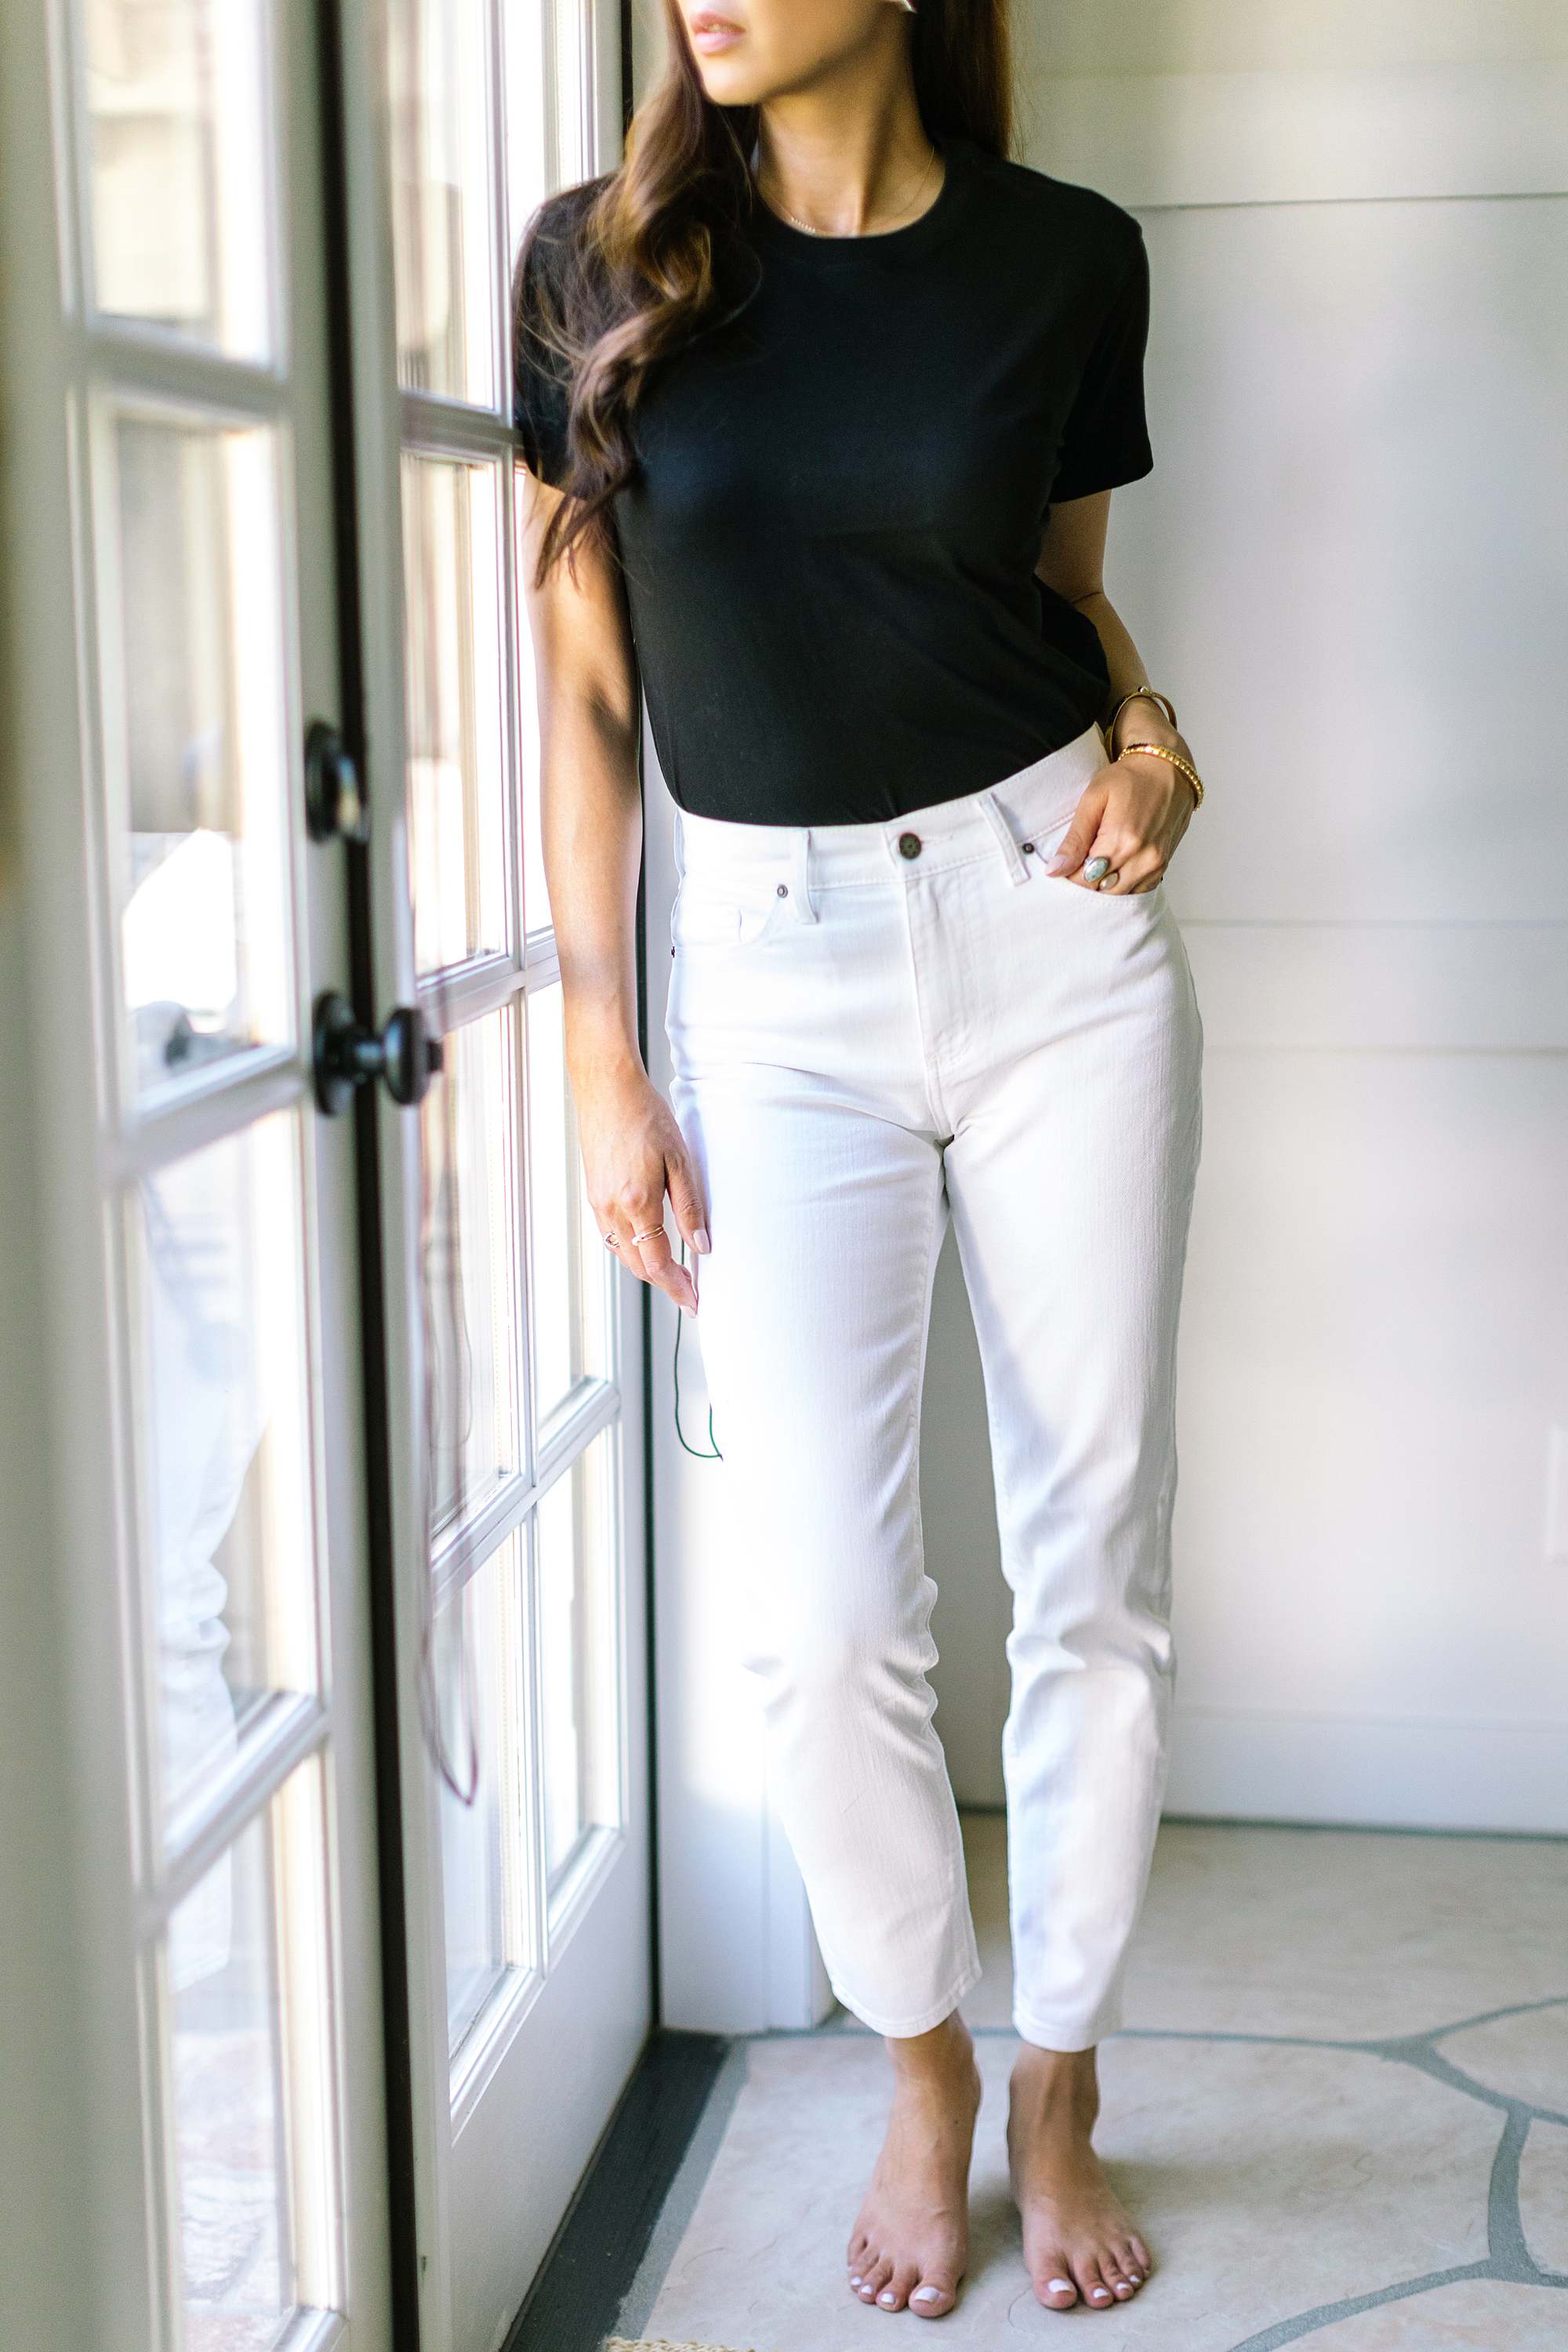 Diana Elizabeth phoenix lifestyle blogger in white pants blacks shirt leaning against black and white bone dresser by lots of house plants. jeans and top by Mott and bow